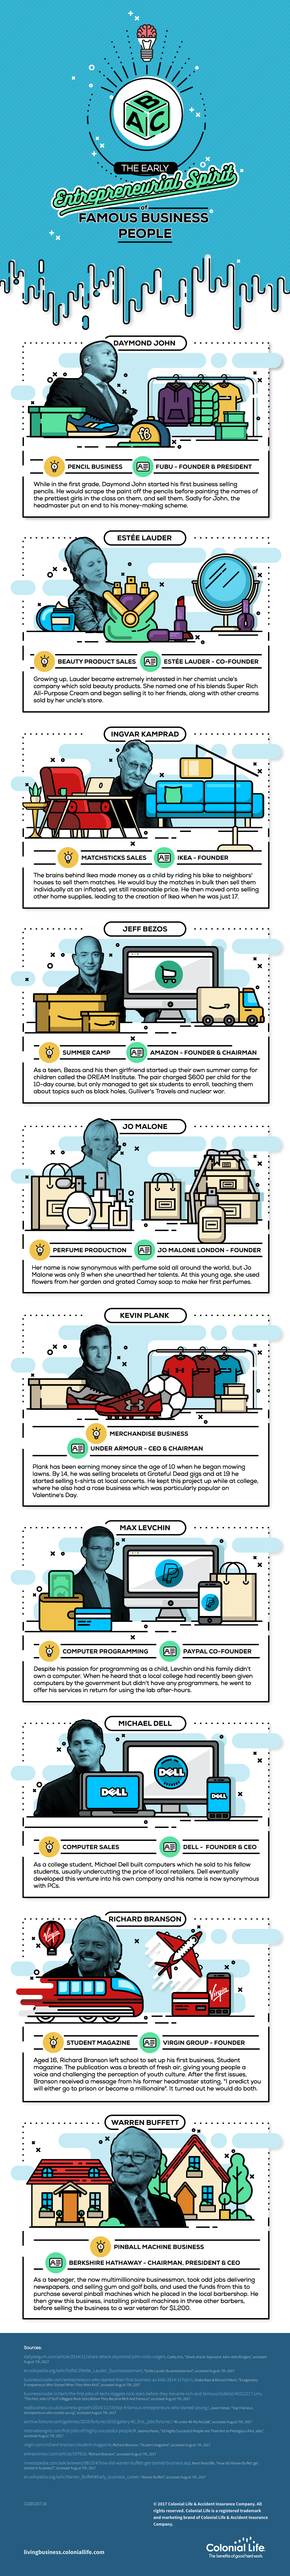 The Early Entrepreneurial Spirit of Famous Business People [Infographic]